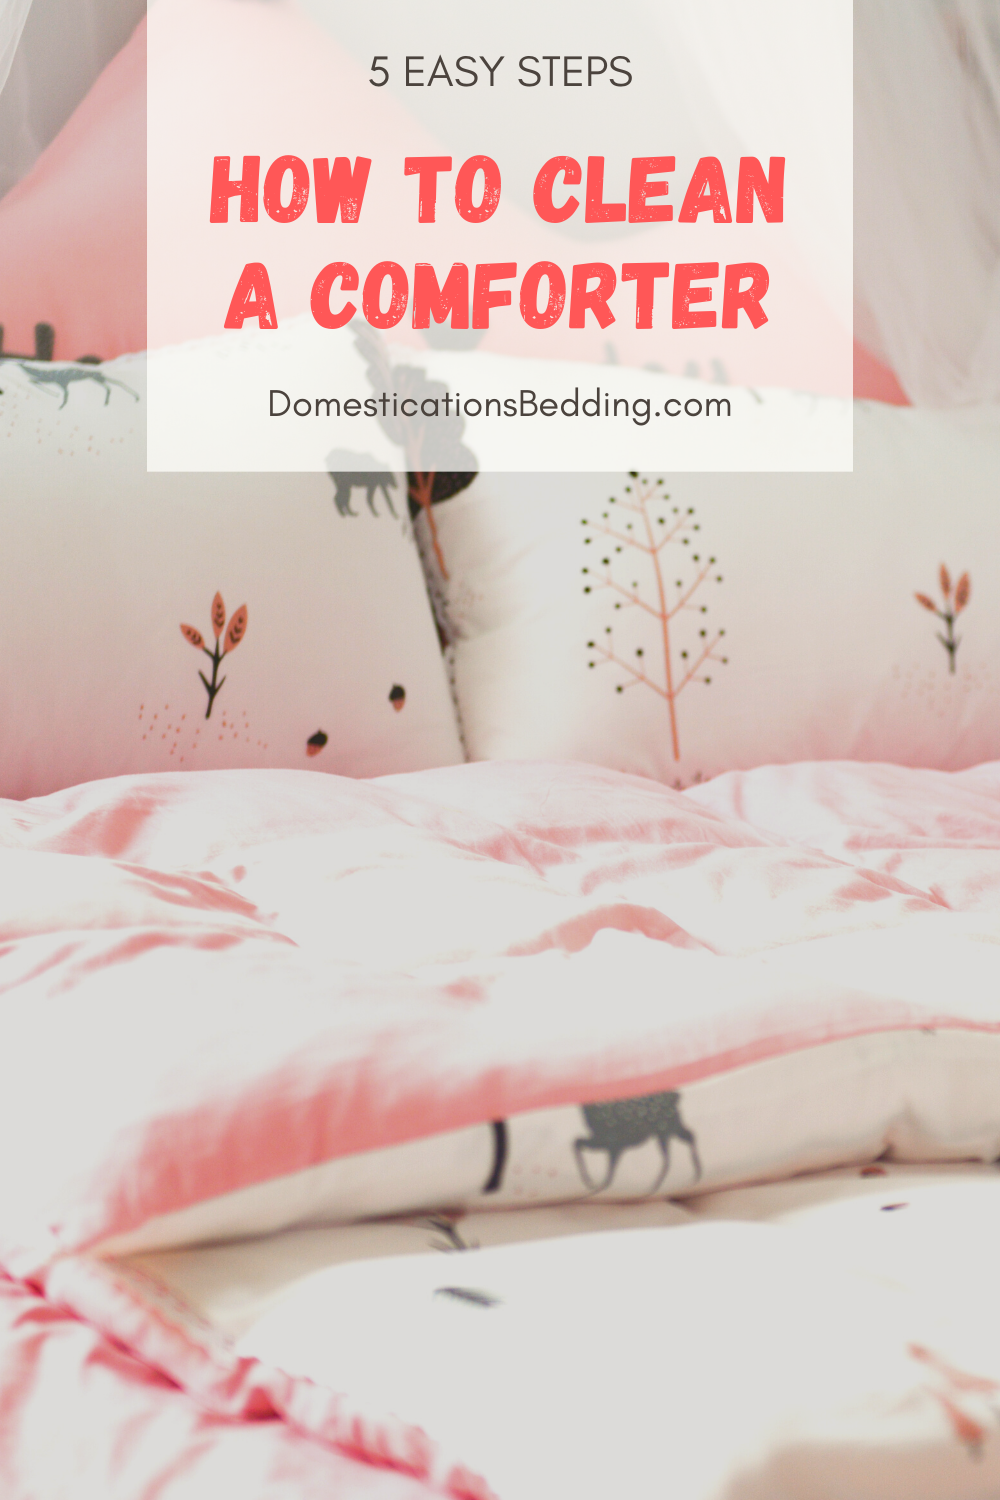 How to Clean a Comforter